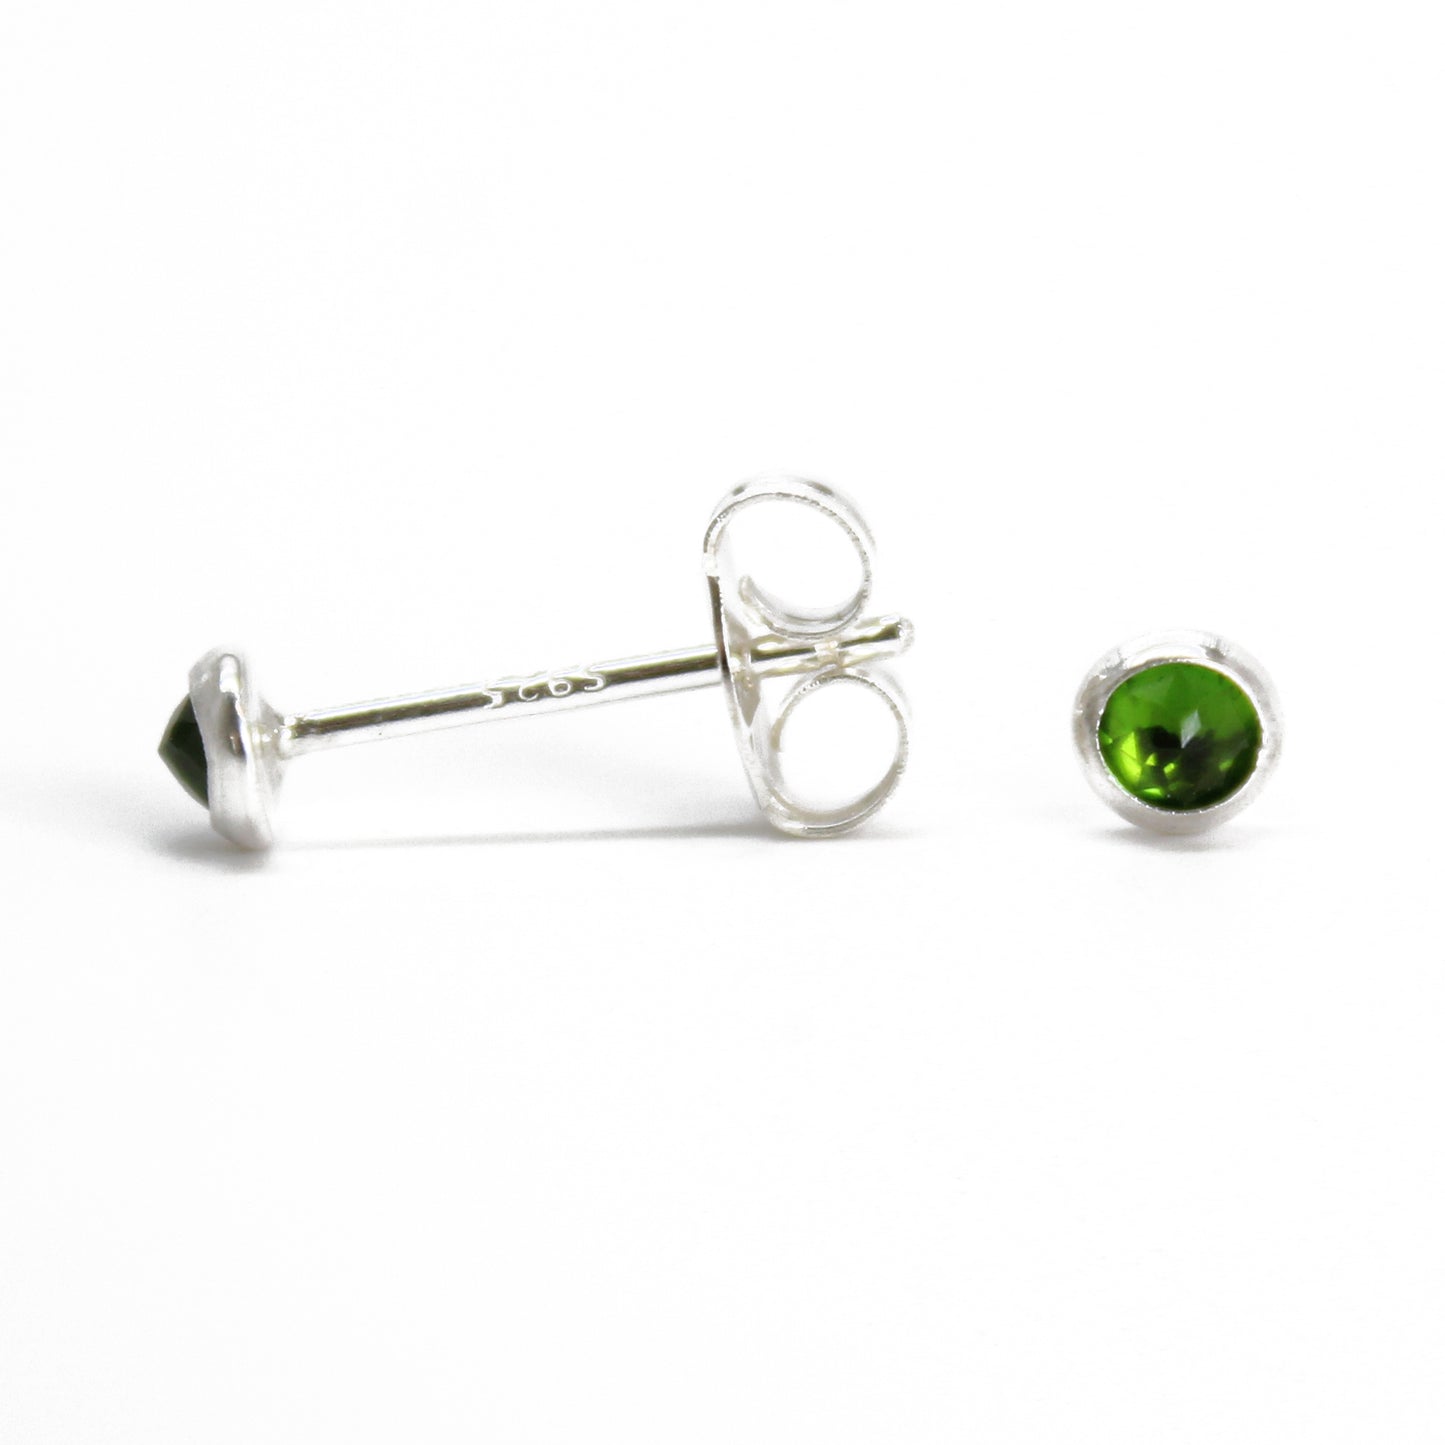 Chrome Diopside Stud Earrings, Tiny 3mm Green Studs